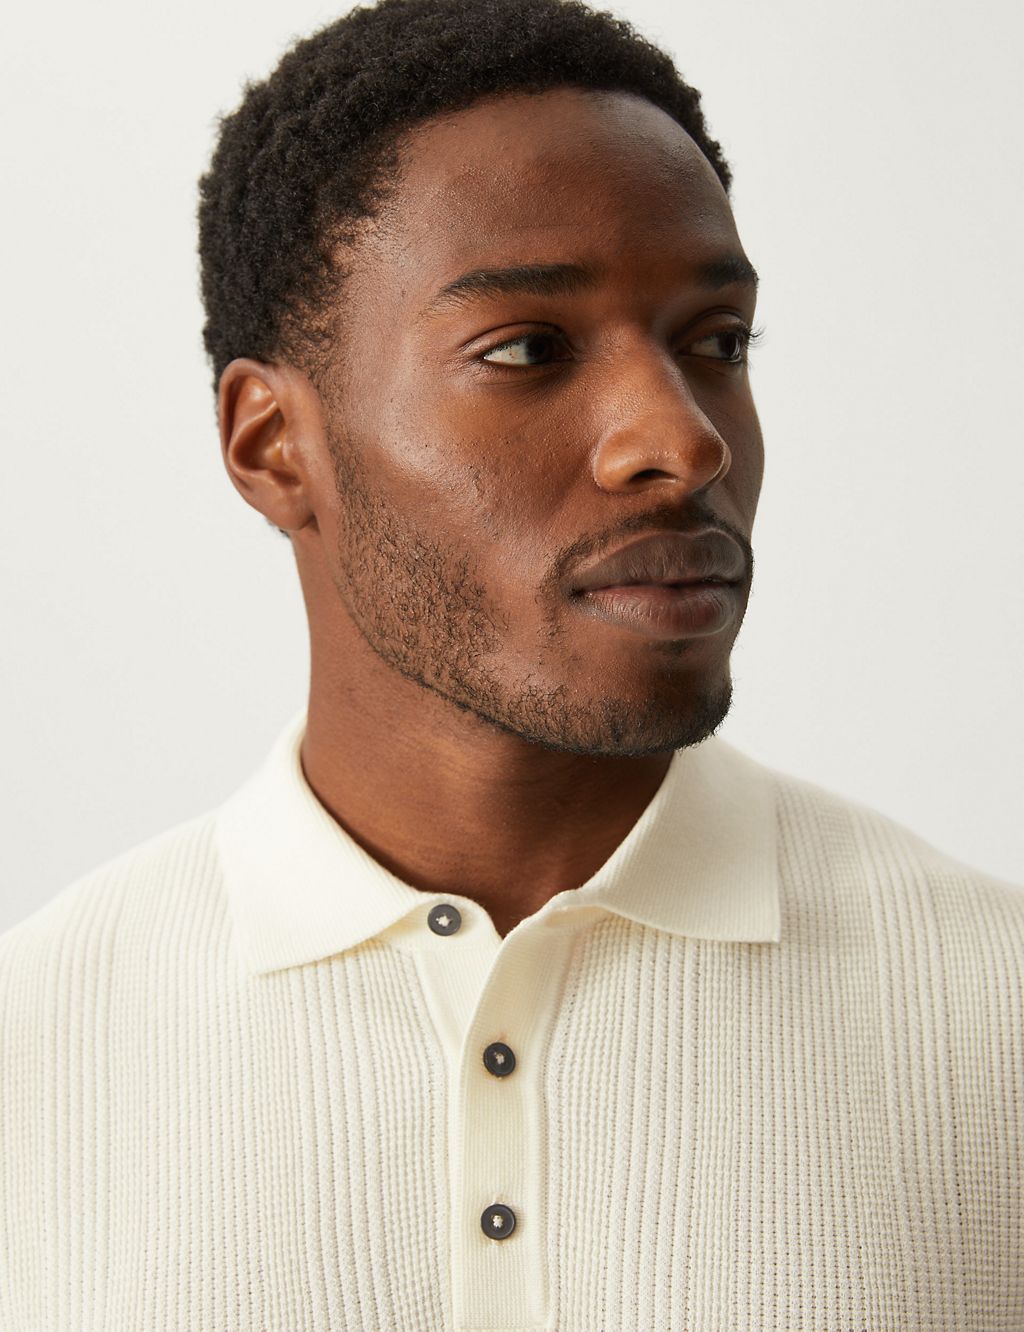 Cotton Rich Textured Knitted Polo Shirt | M&S Collection | M&S